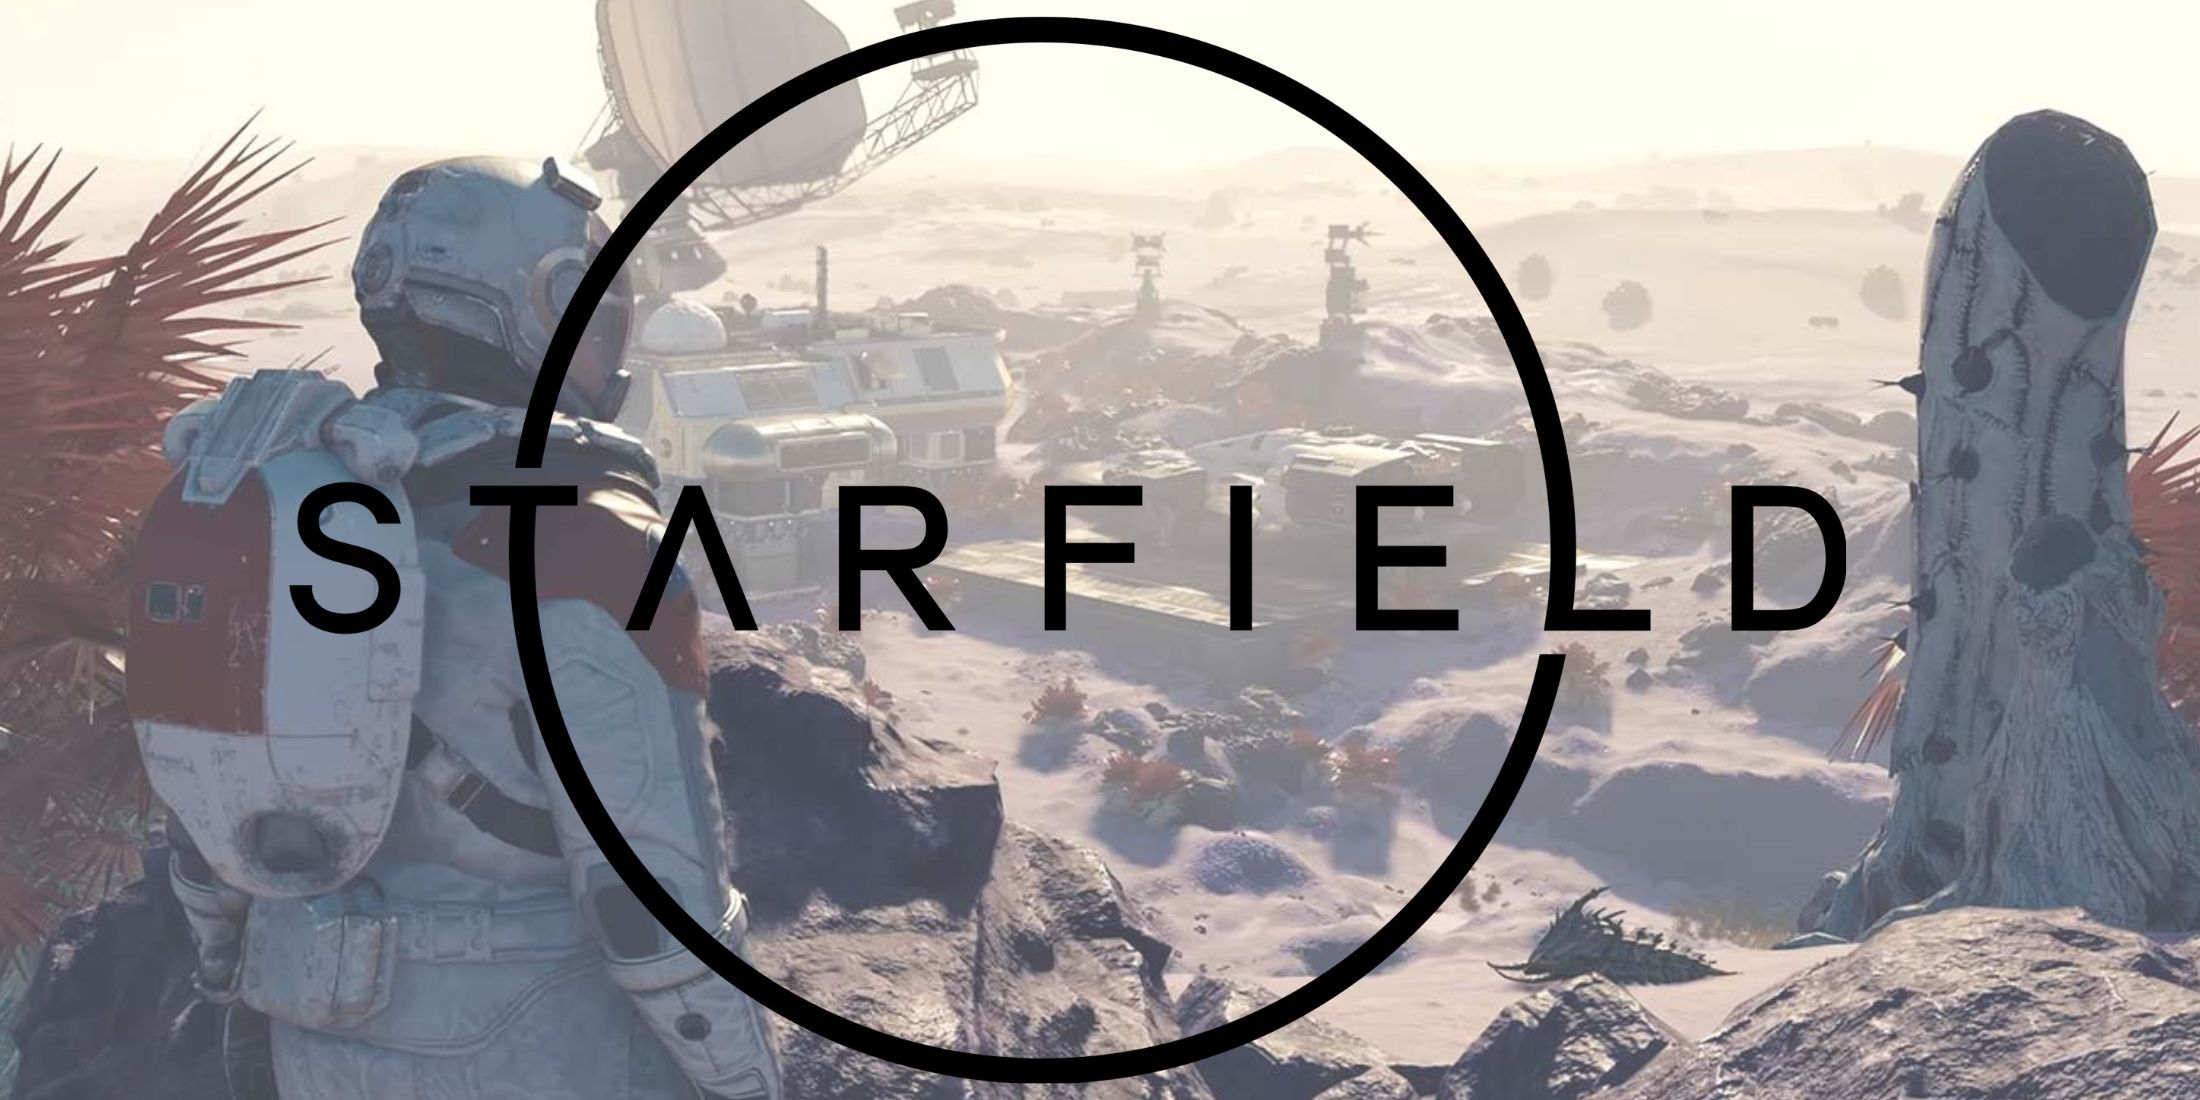 The player character from Starfield looks out on a planet with the game logo in front.